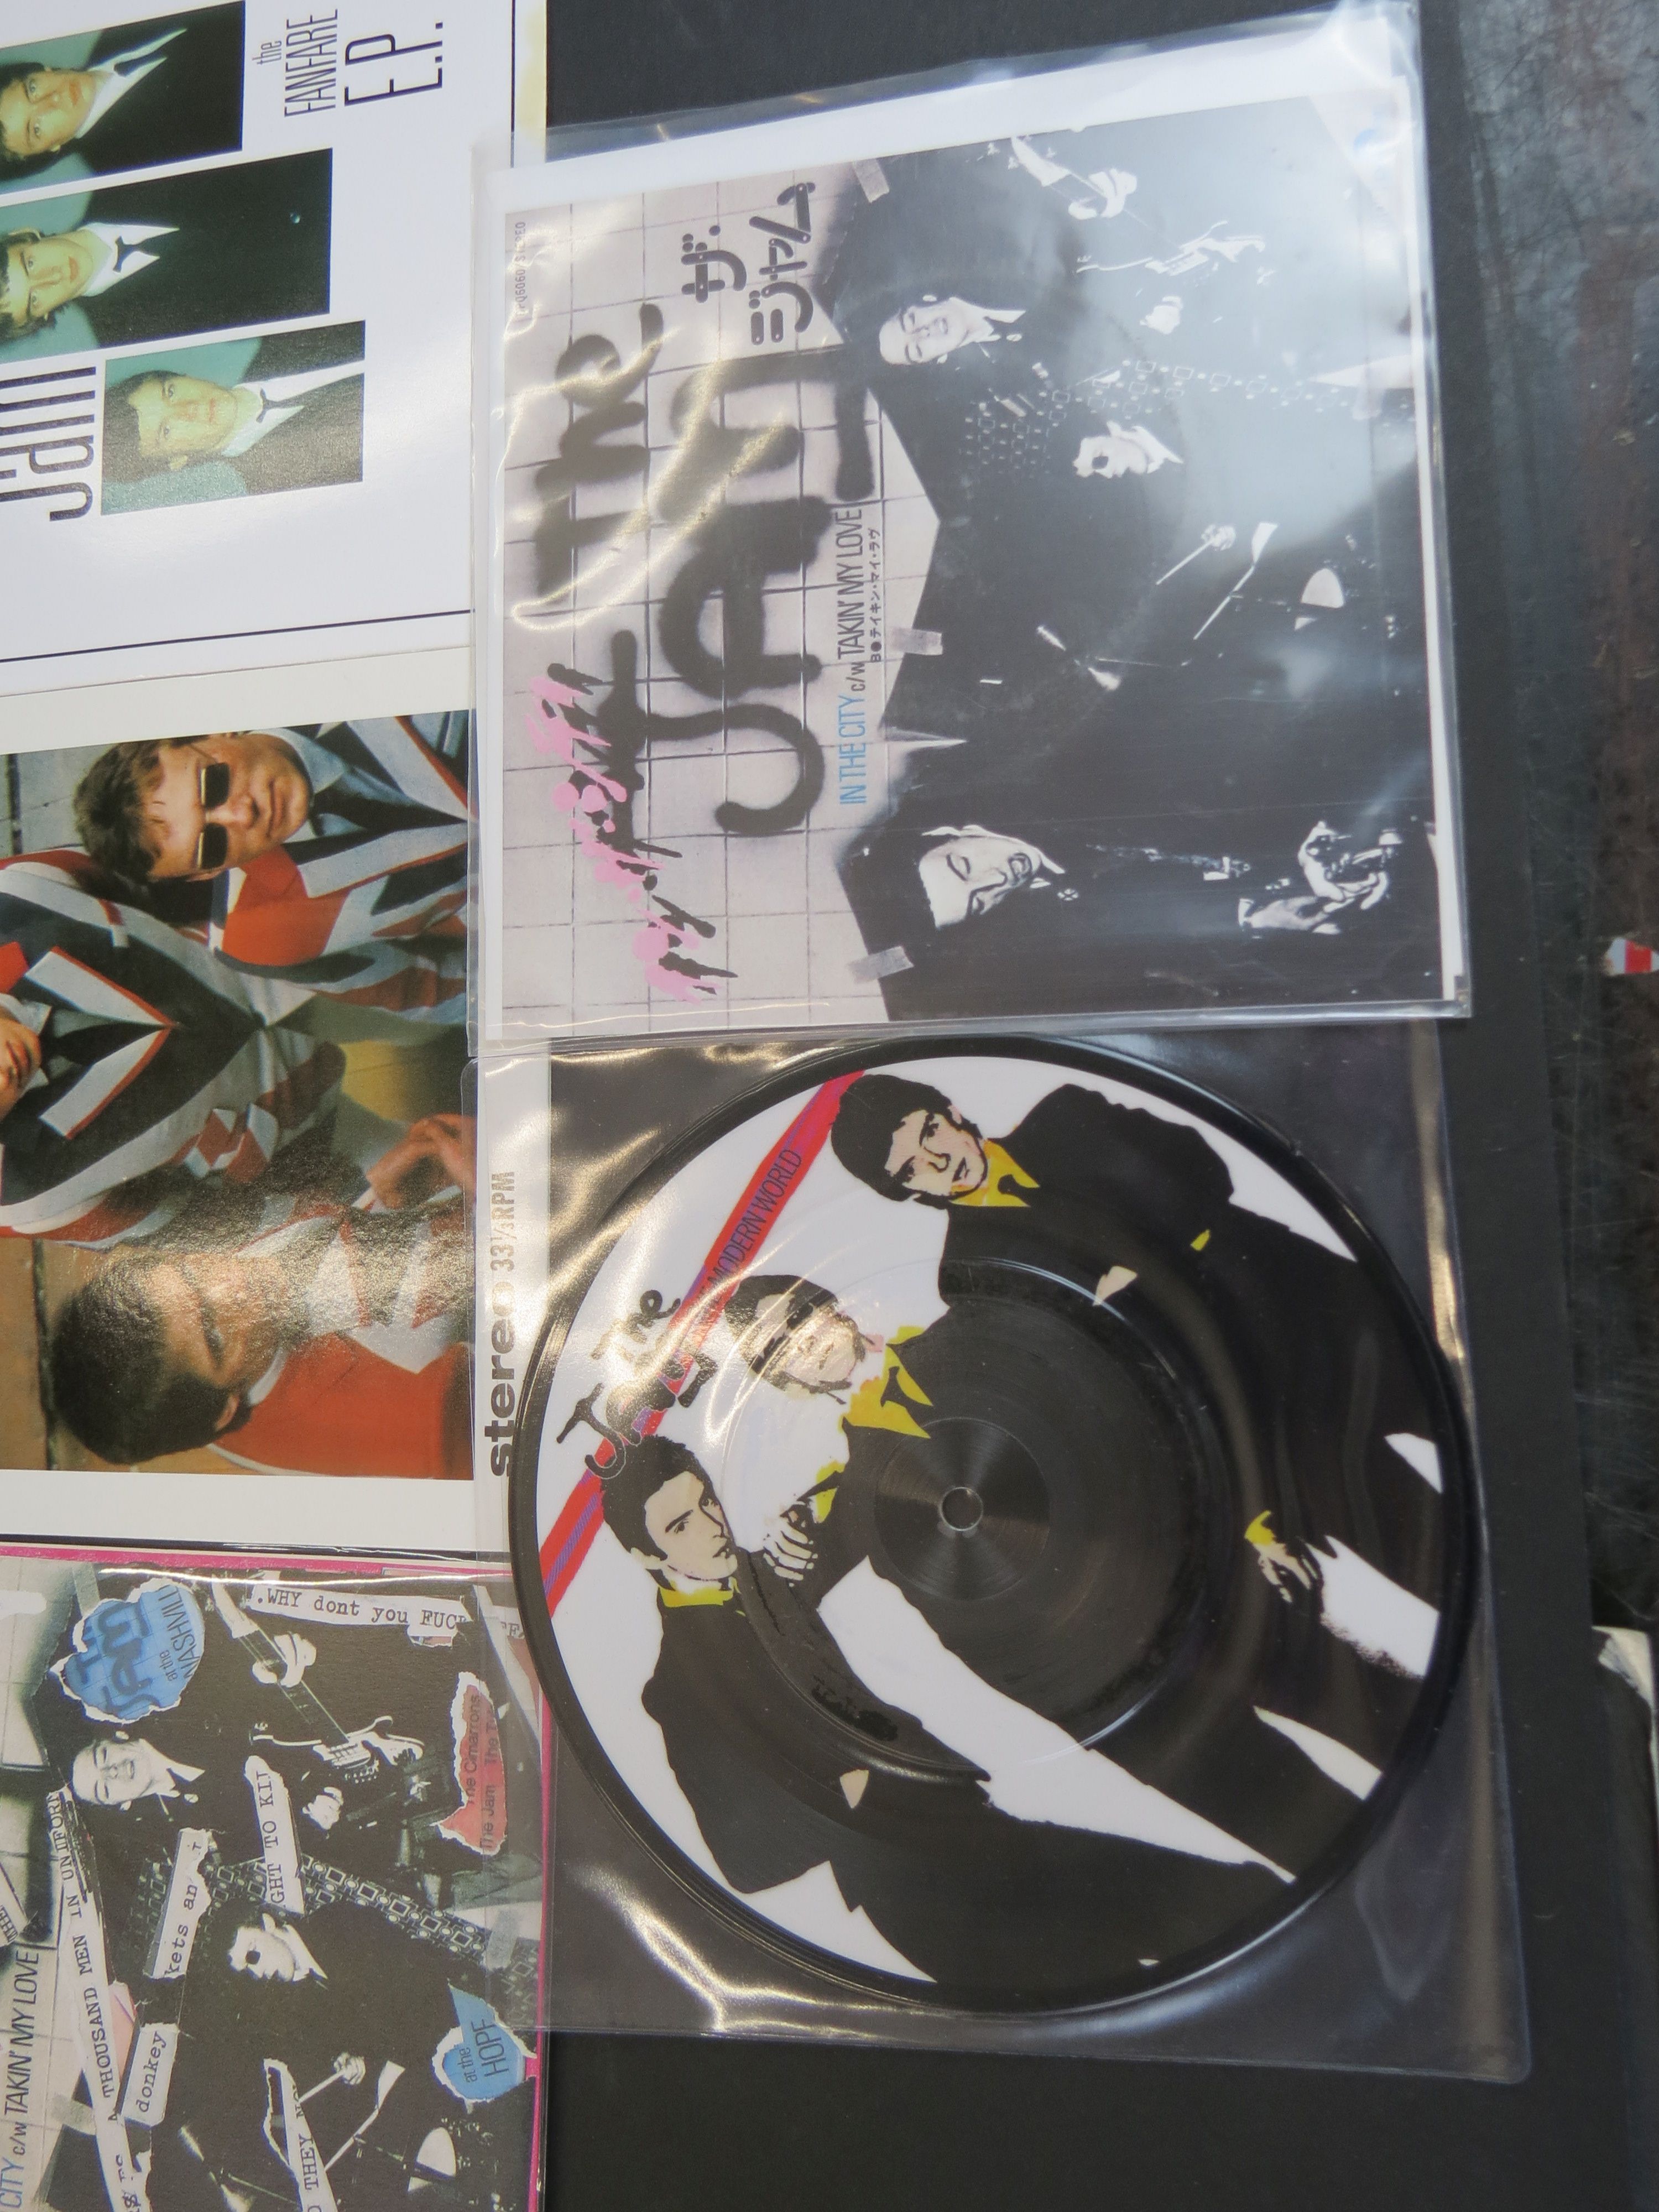 Vinyl - The Jam - 8 rare Private Fan pressings singles and EP’s, including: In The City (Japanese - Image 4 of 4